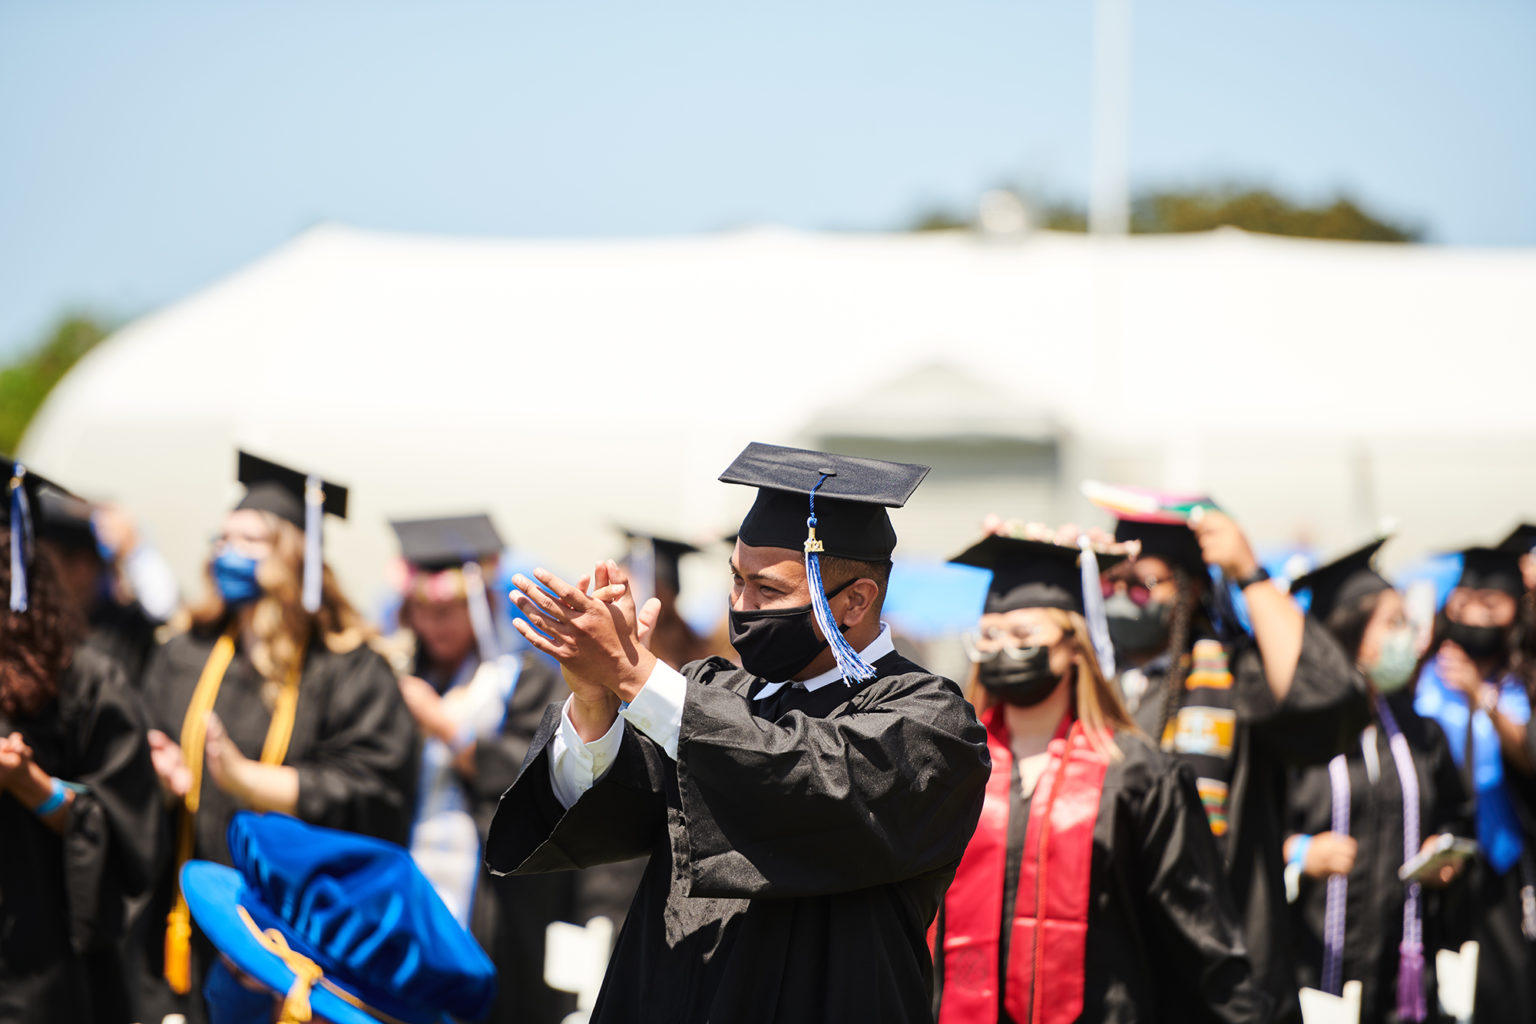 Chaminade University hosts its first inperson graduation ceremony in